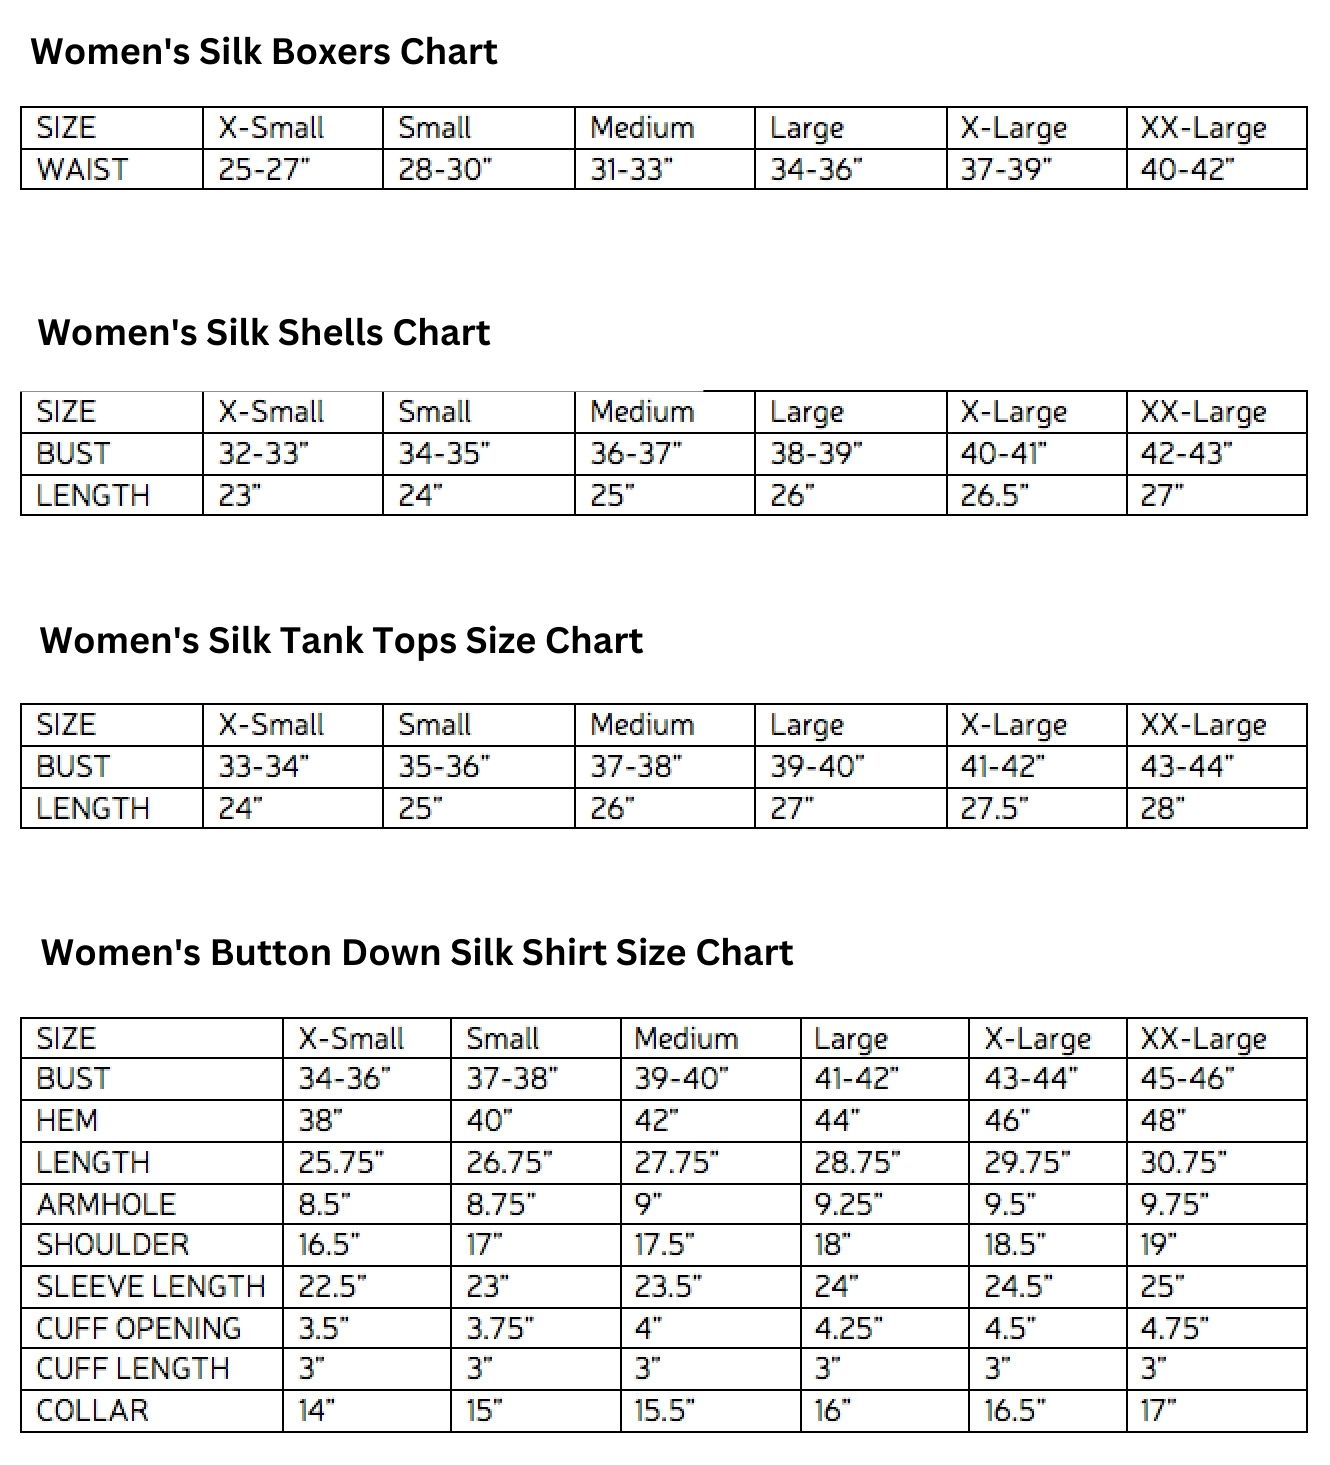 Men's and Women's size charts for Royal Silk® clothing.